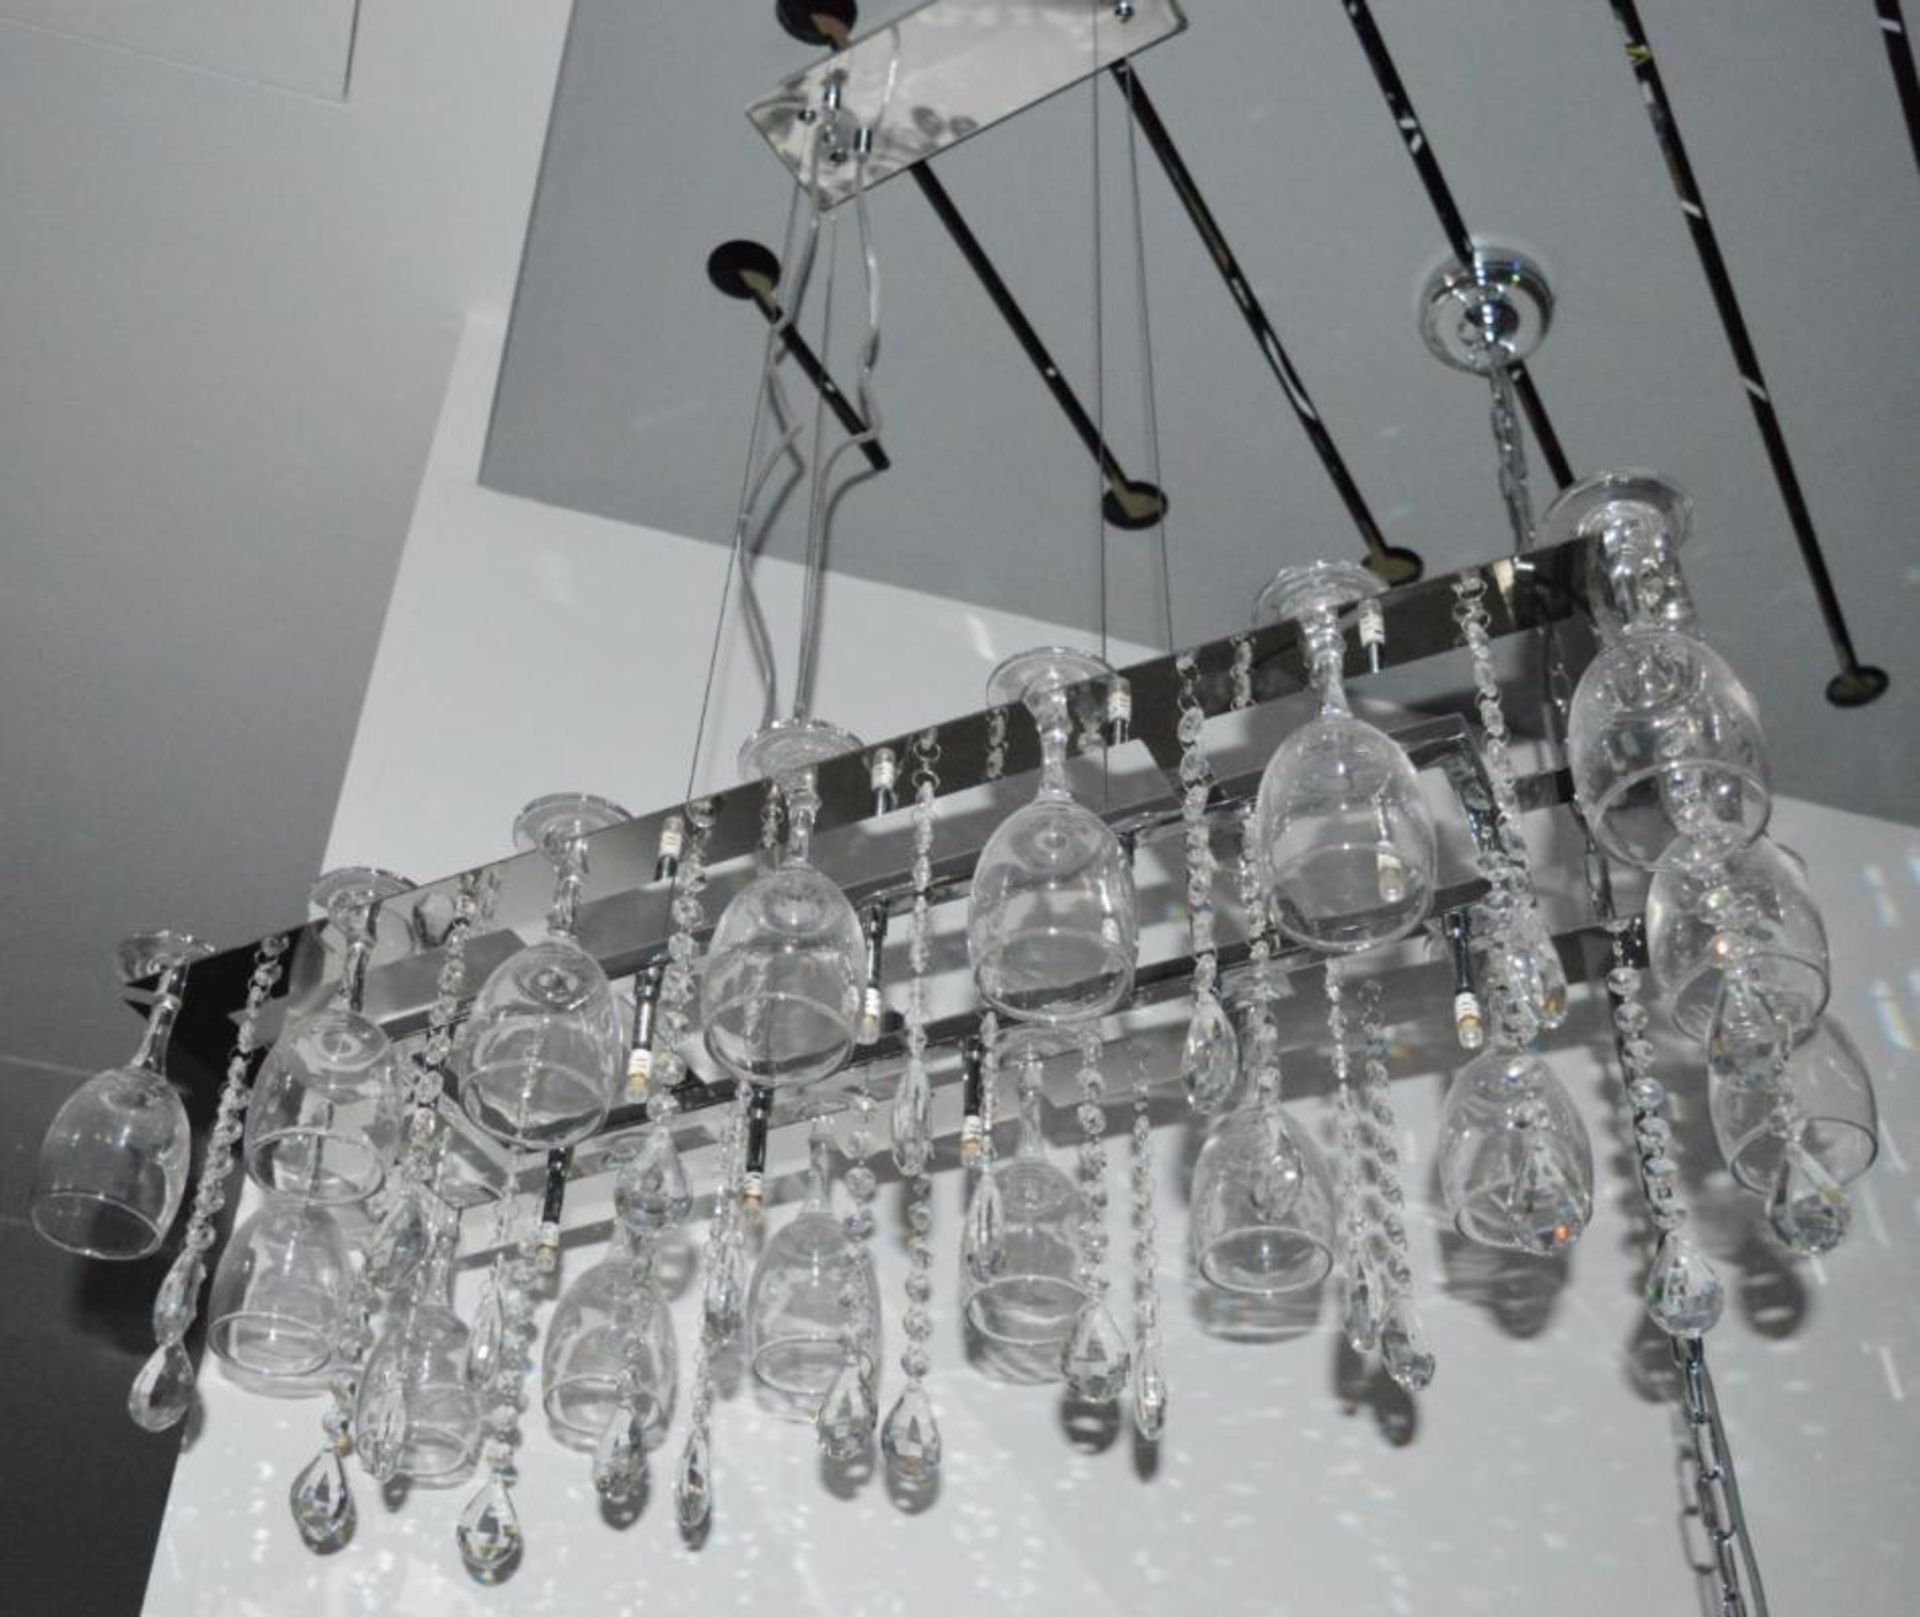 1 x Vino Chrome 10 Light Suspended Light Fitting With Crystal Button Drops and Sixteen Wine Glasses - Image 2 of 7